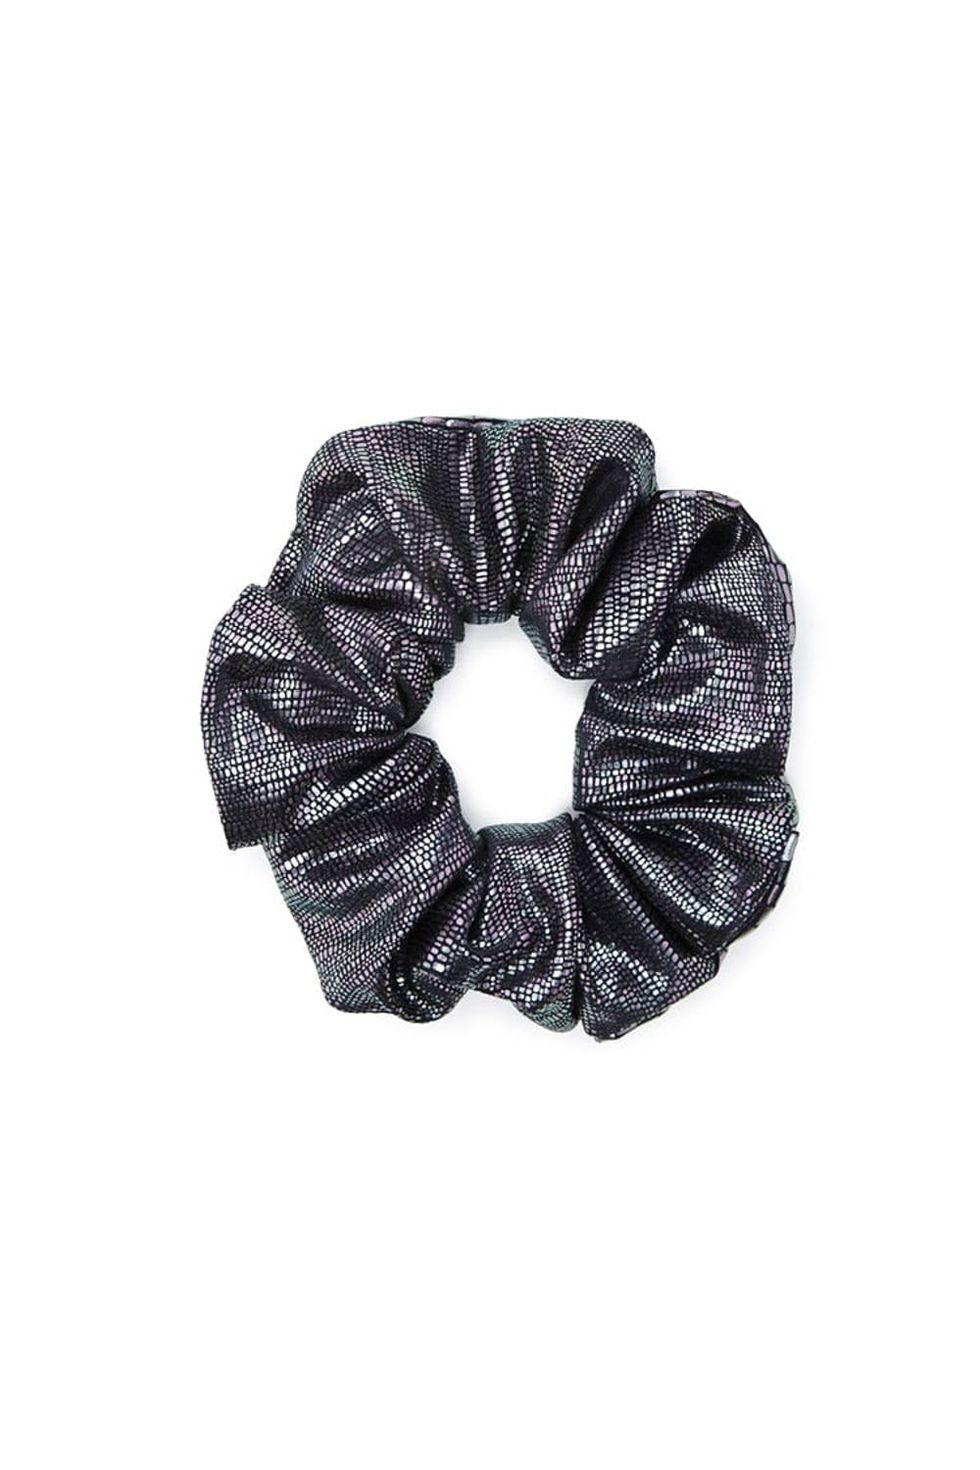 13 Hair Accessories for Lazy Girl Hair - Brit + Co